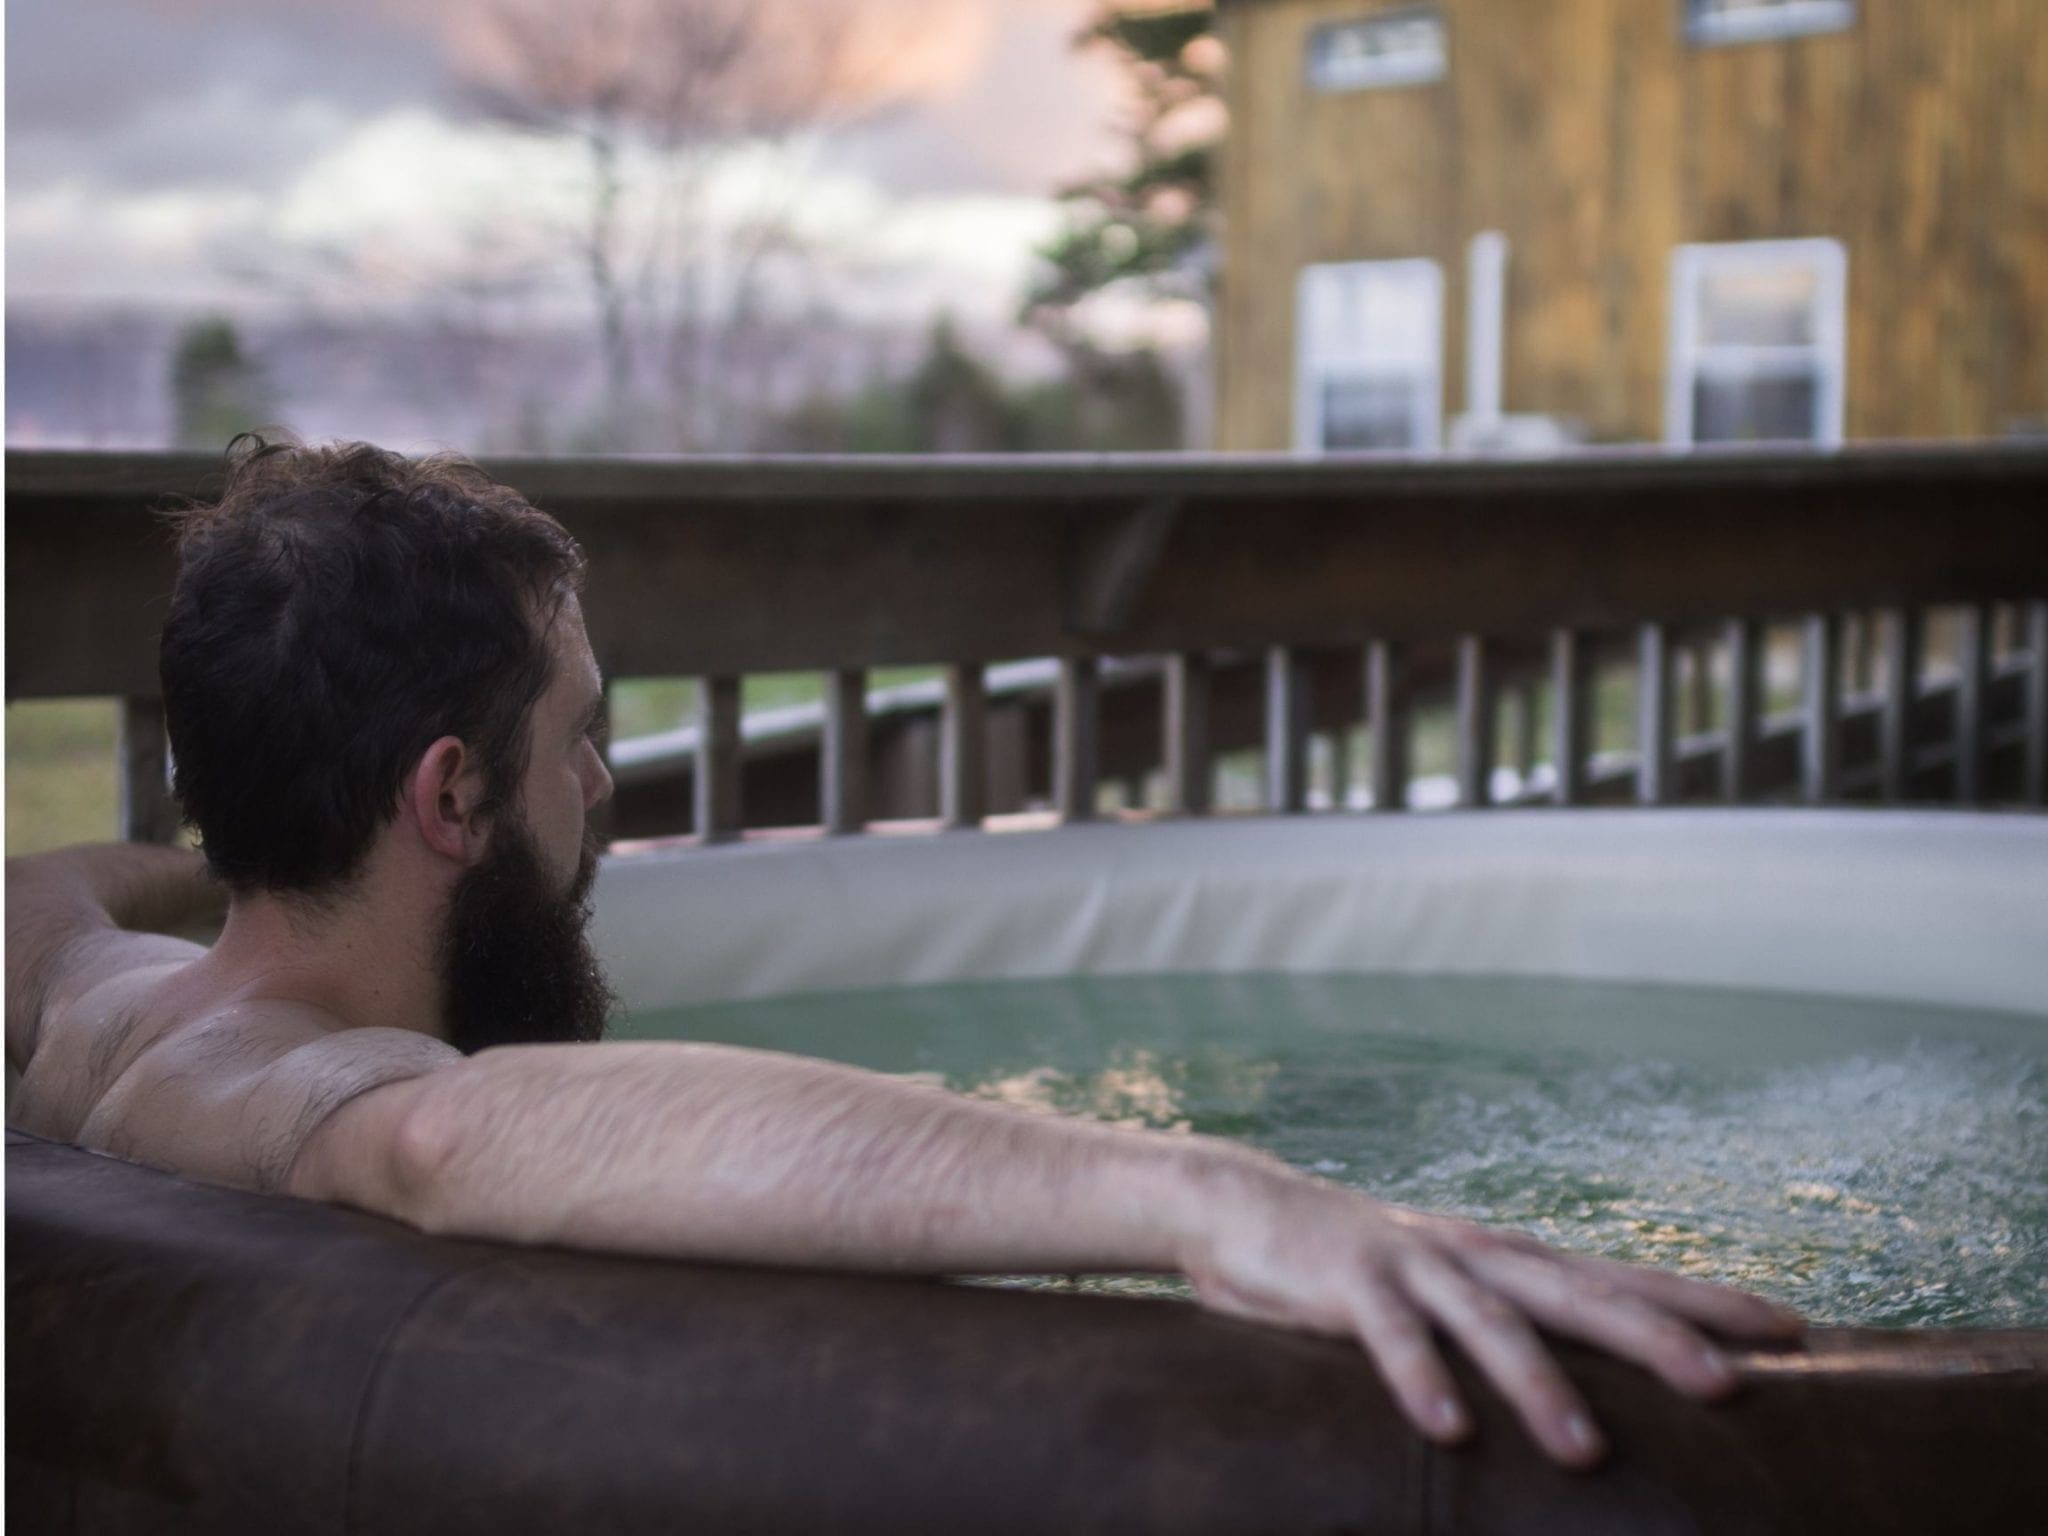 Man sitting in an outdoor hot tub